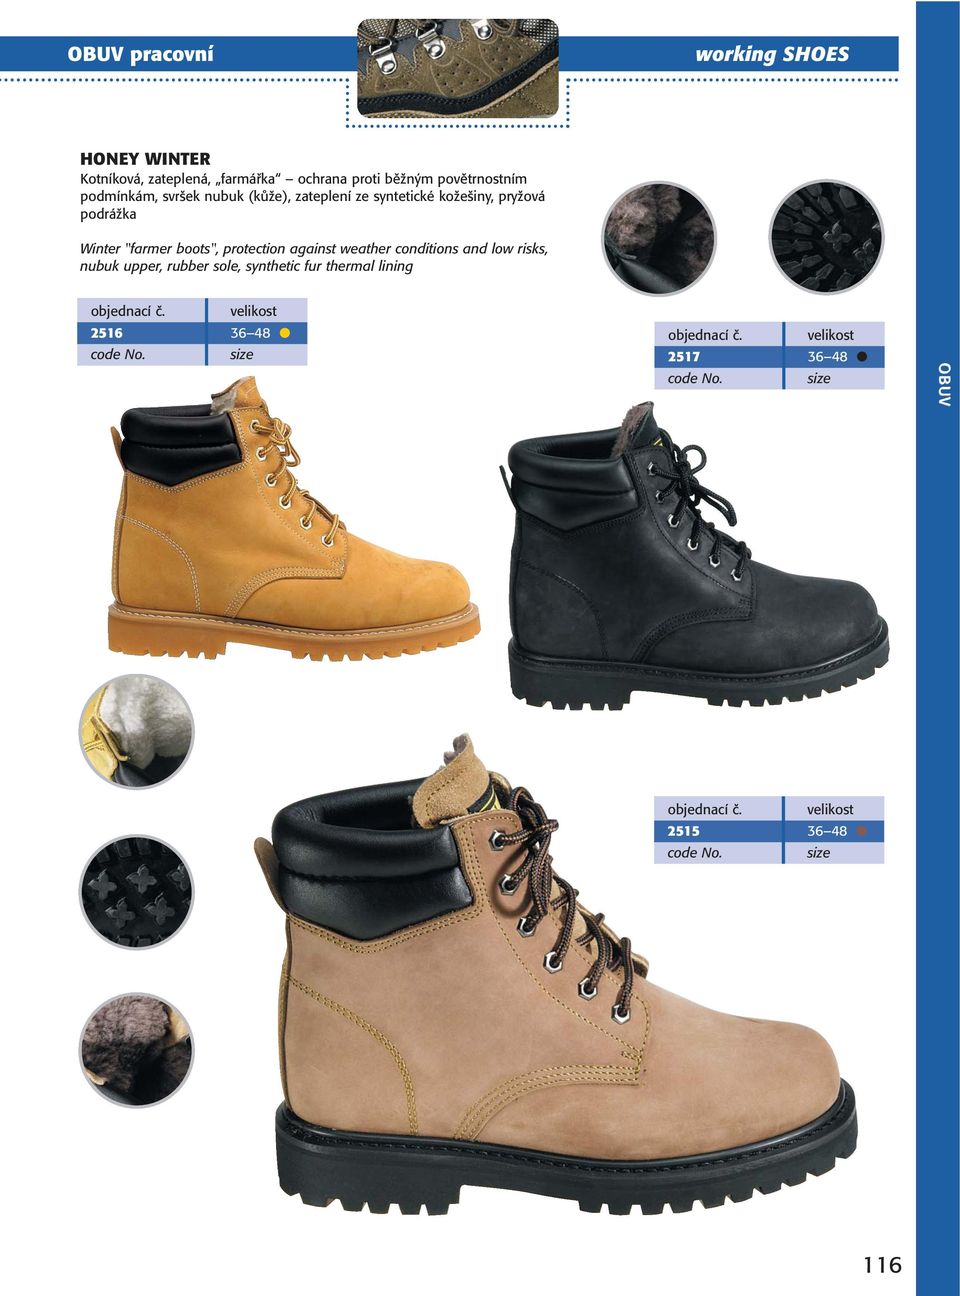 podrážka Winter "farmer boots", protection against weather conditions and low risks,